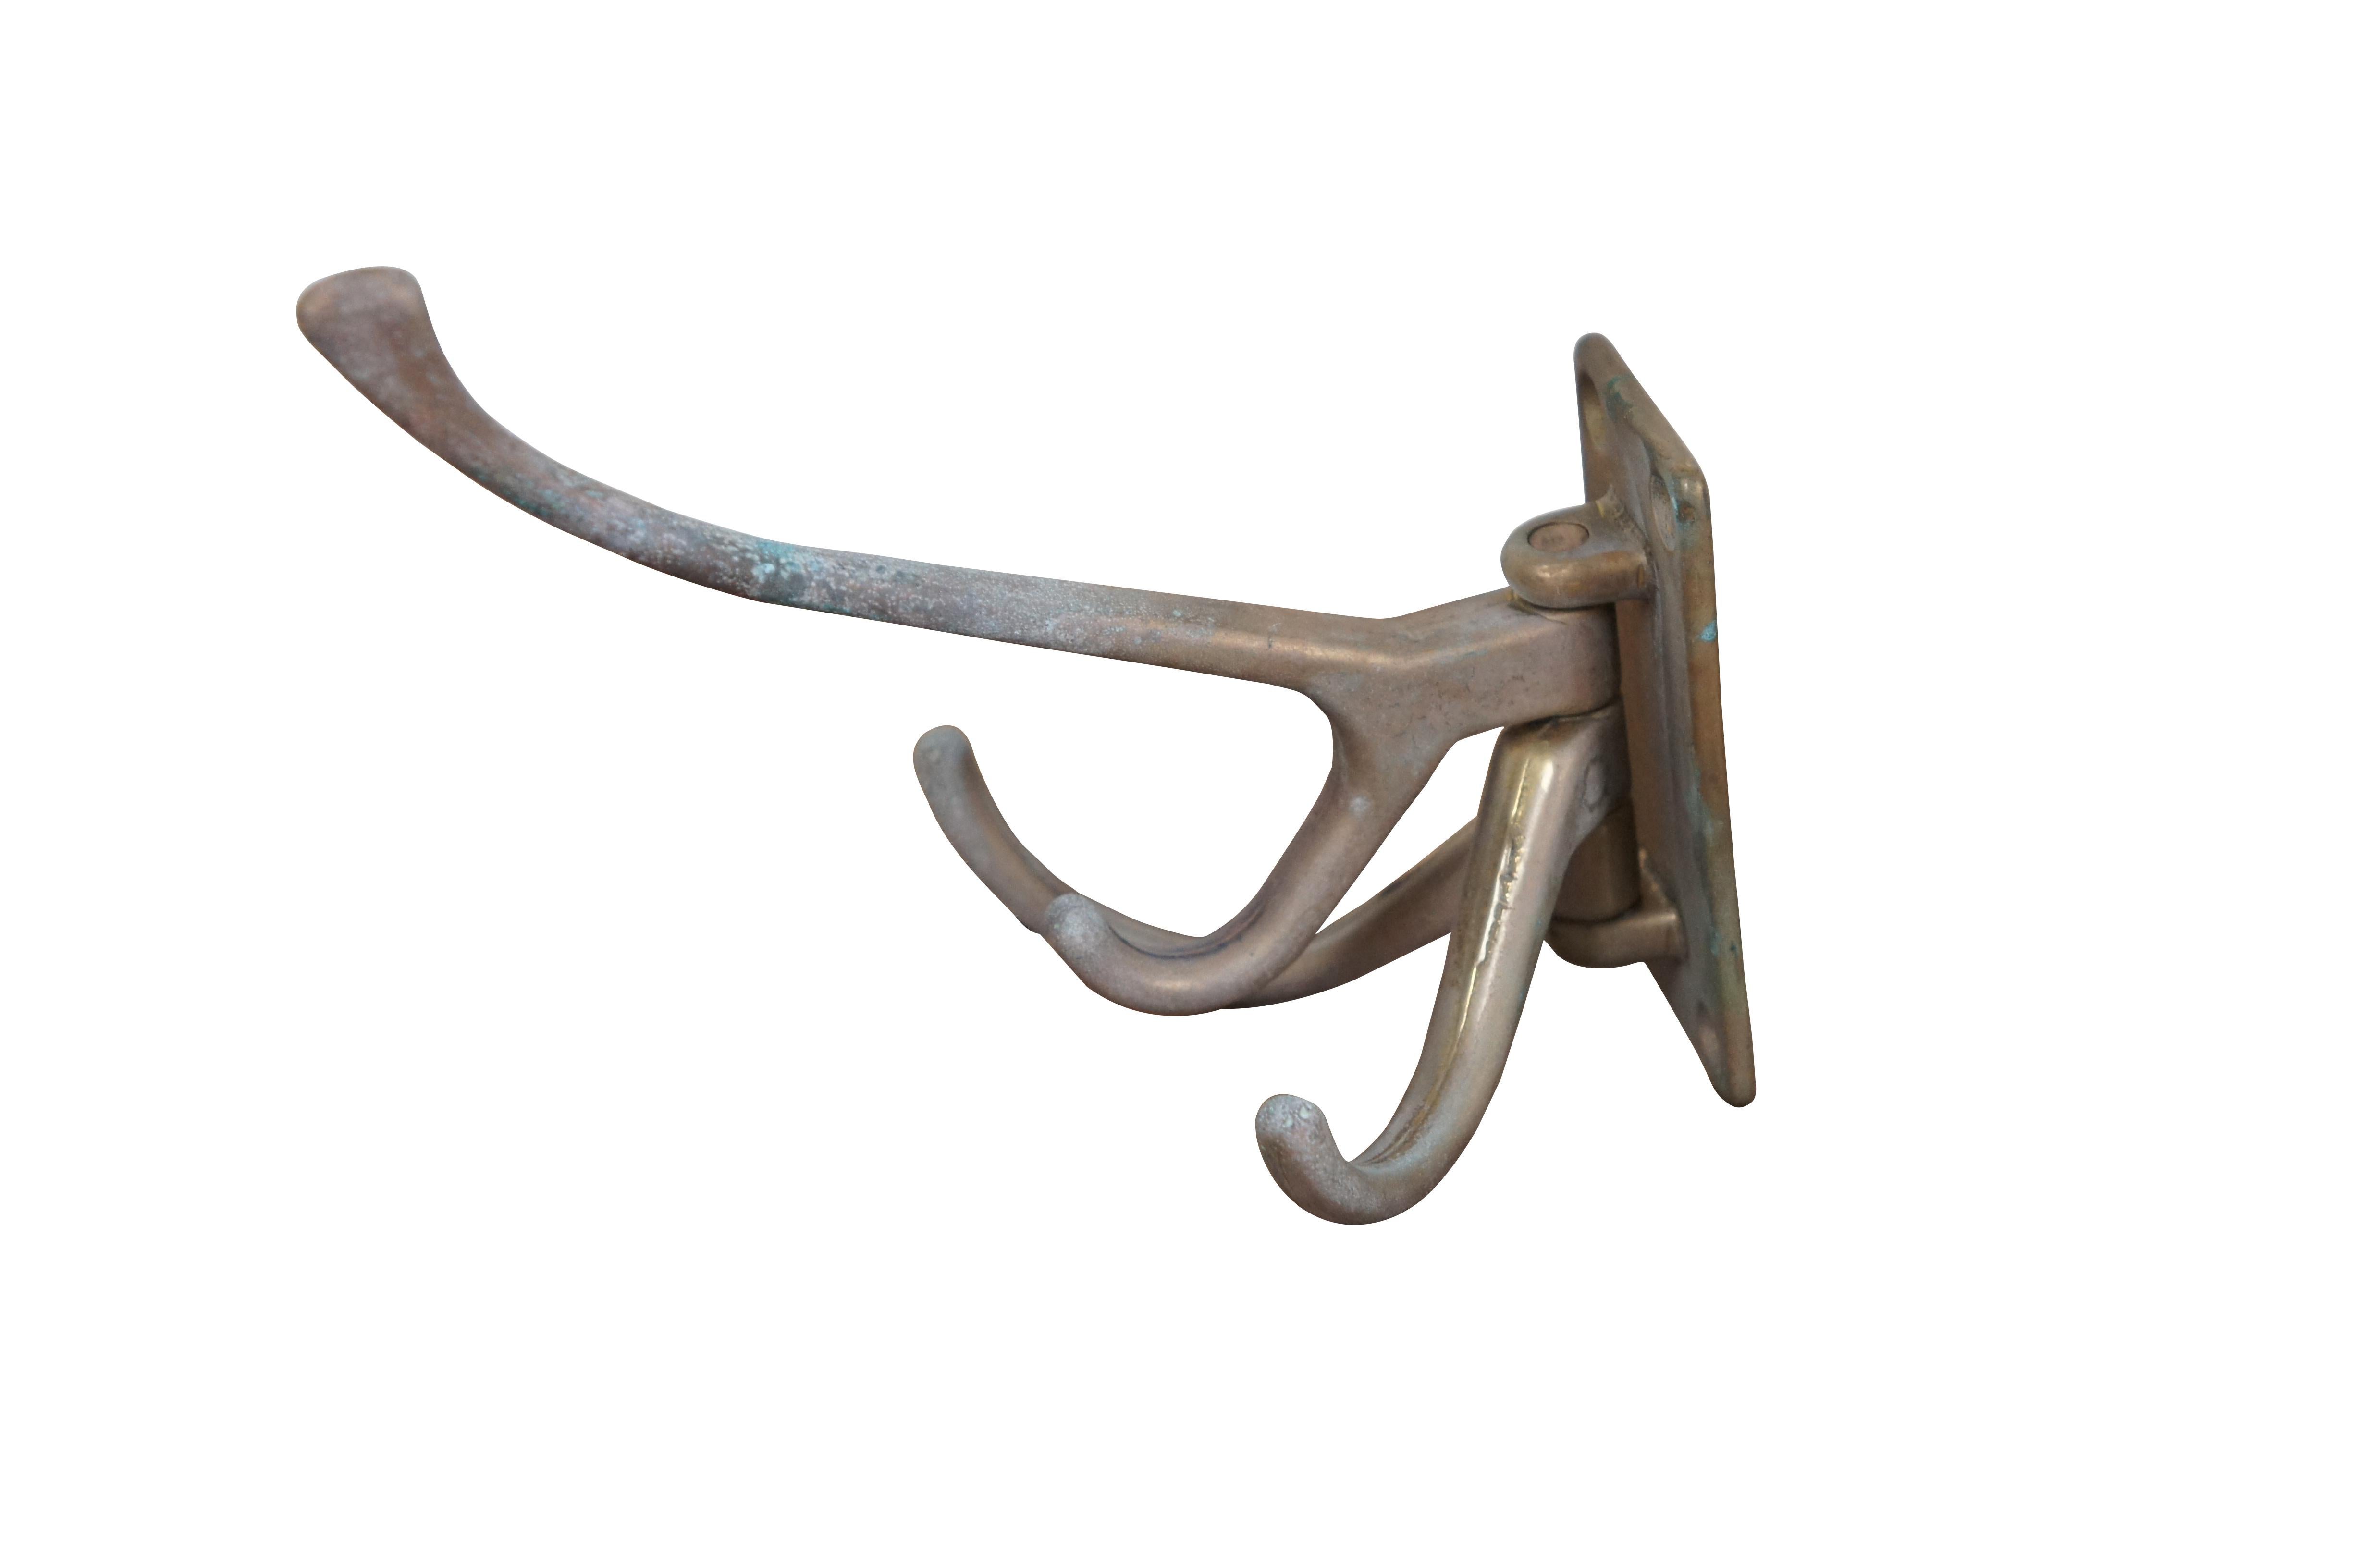 Mid to late 20th century brass coat / hat hook featuring a swiveling multi-use design with one large and small double hook at the top and top smaller single hooks below. Made in Italy.

Dimensions:
5